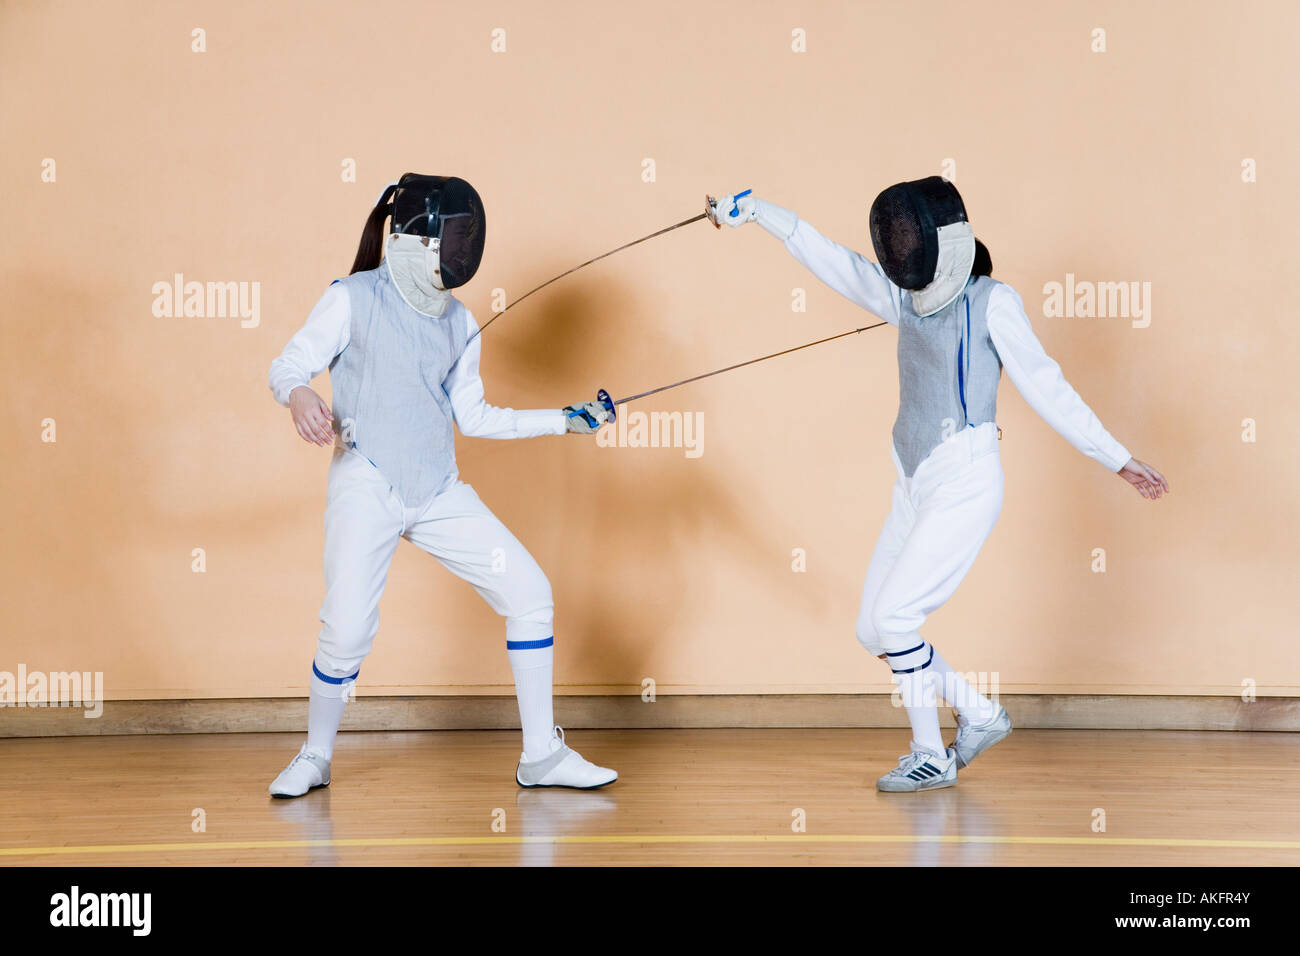 Two fencers fencing Stock Photo